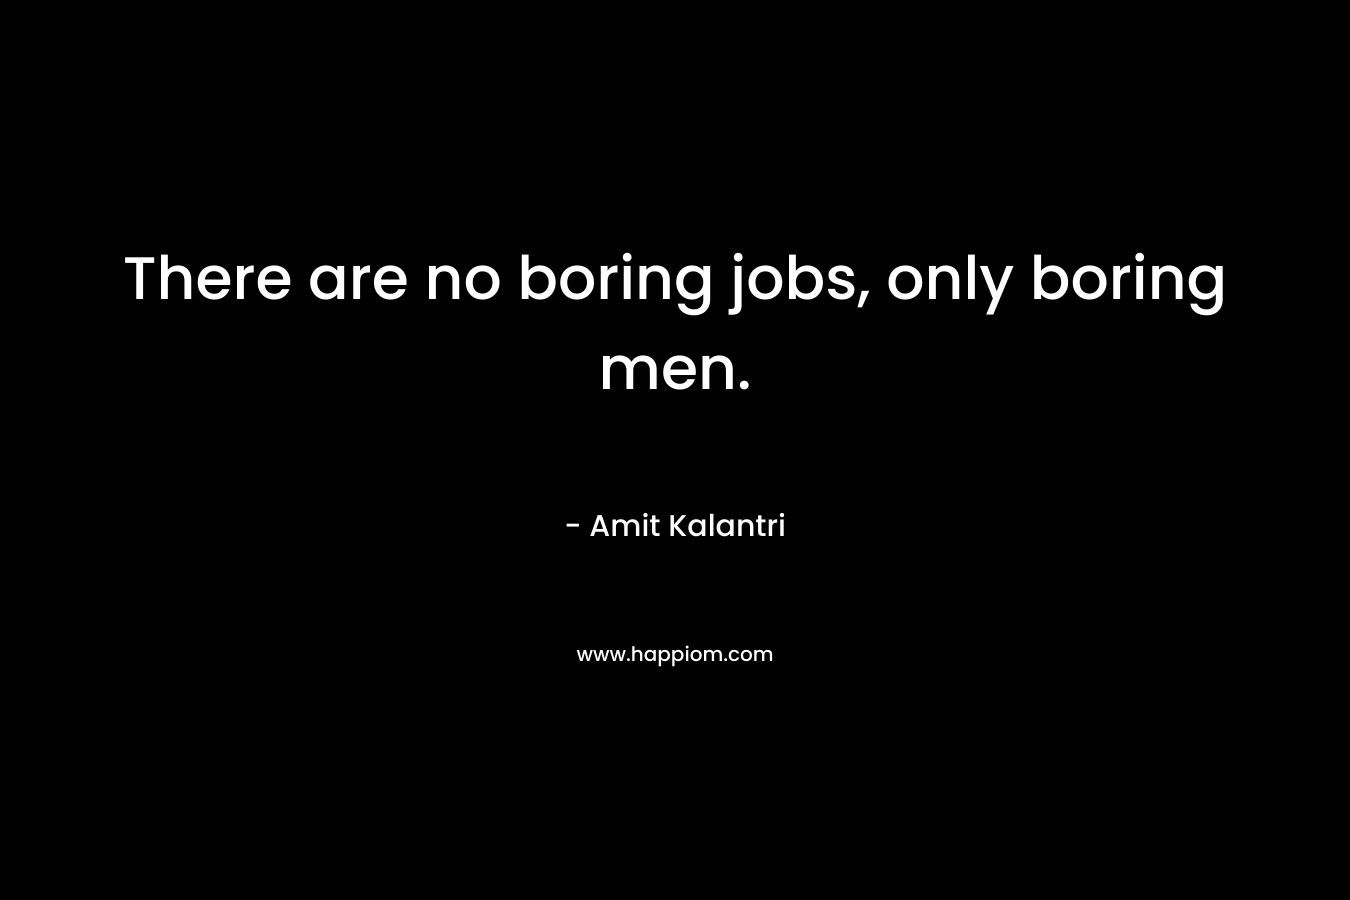 There are no boring jobs, only boring men.